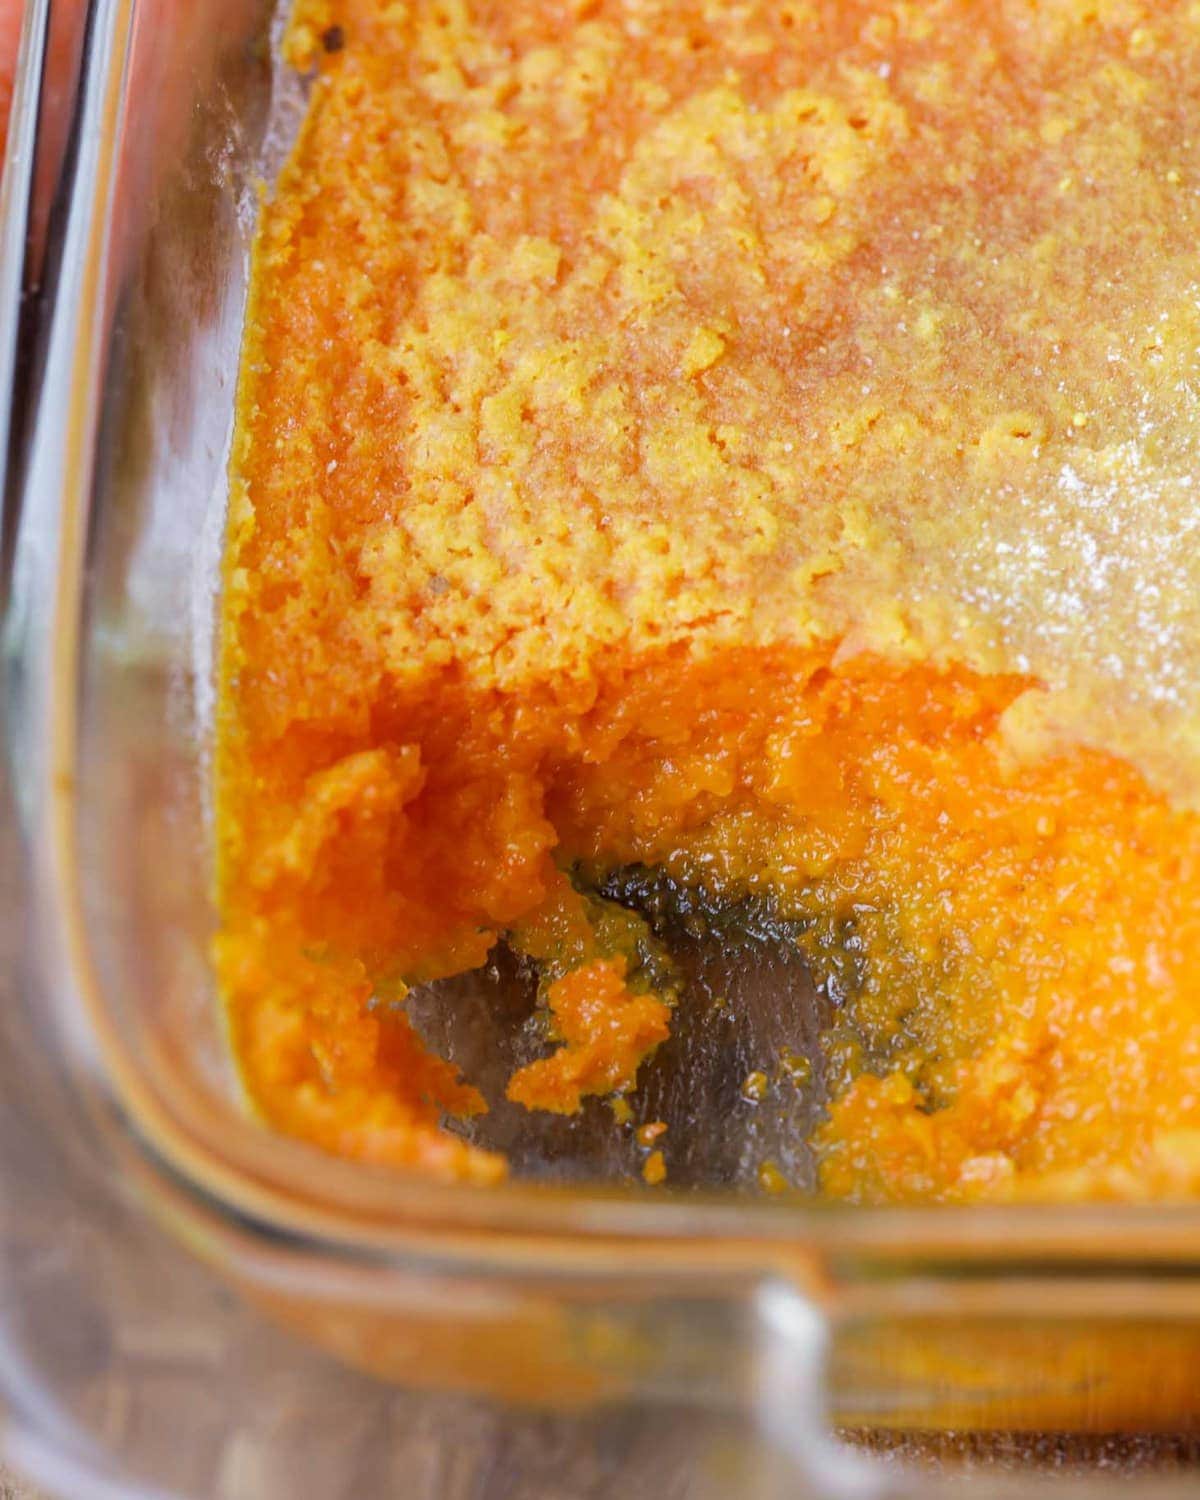 Carrot Souffle in a baking dishing, with a scoop missing